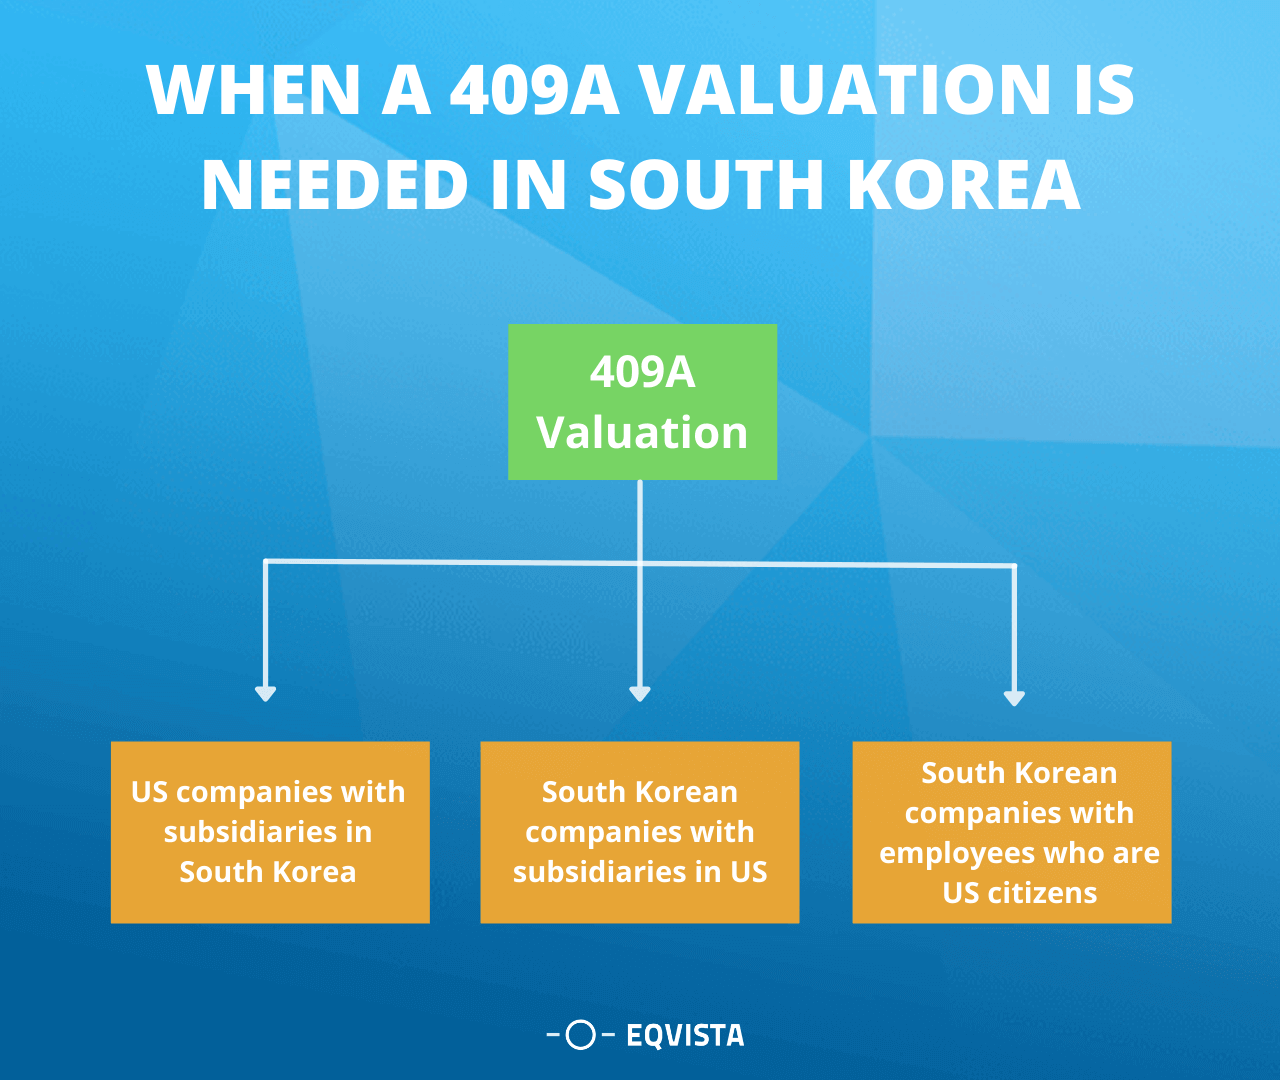 When is a 409a valuation required for a South Korean company?